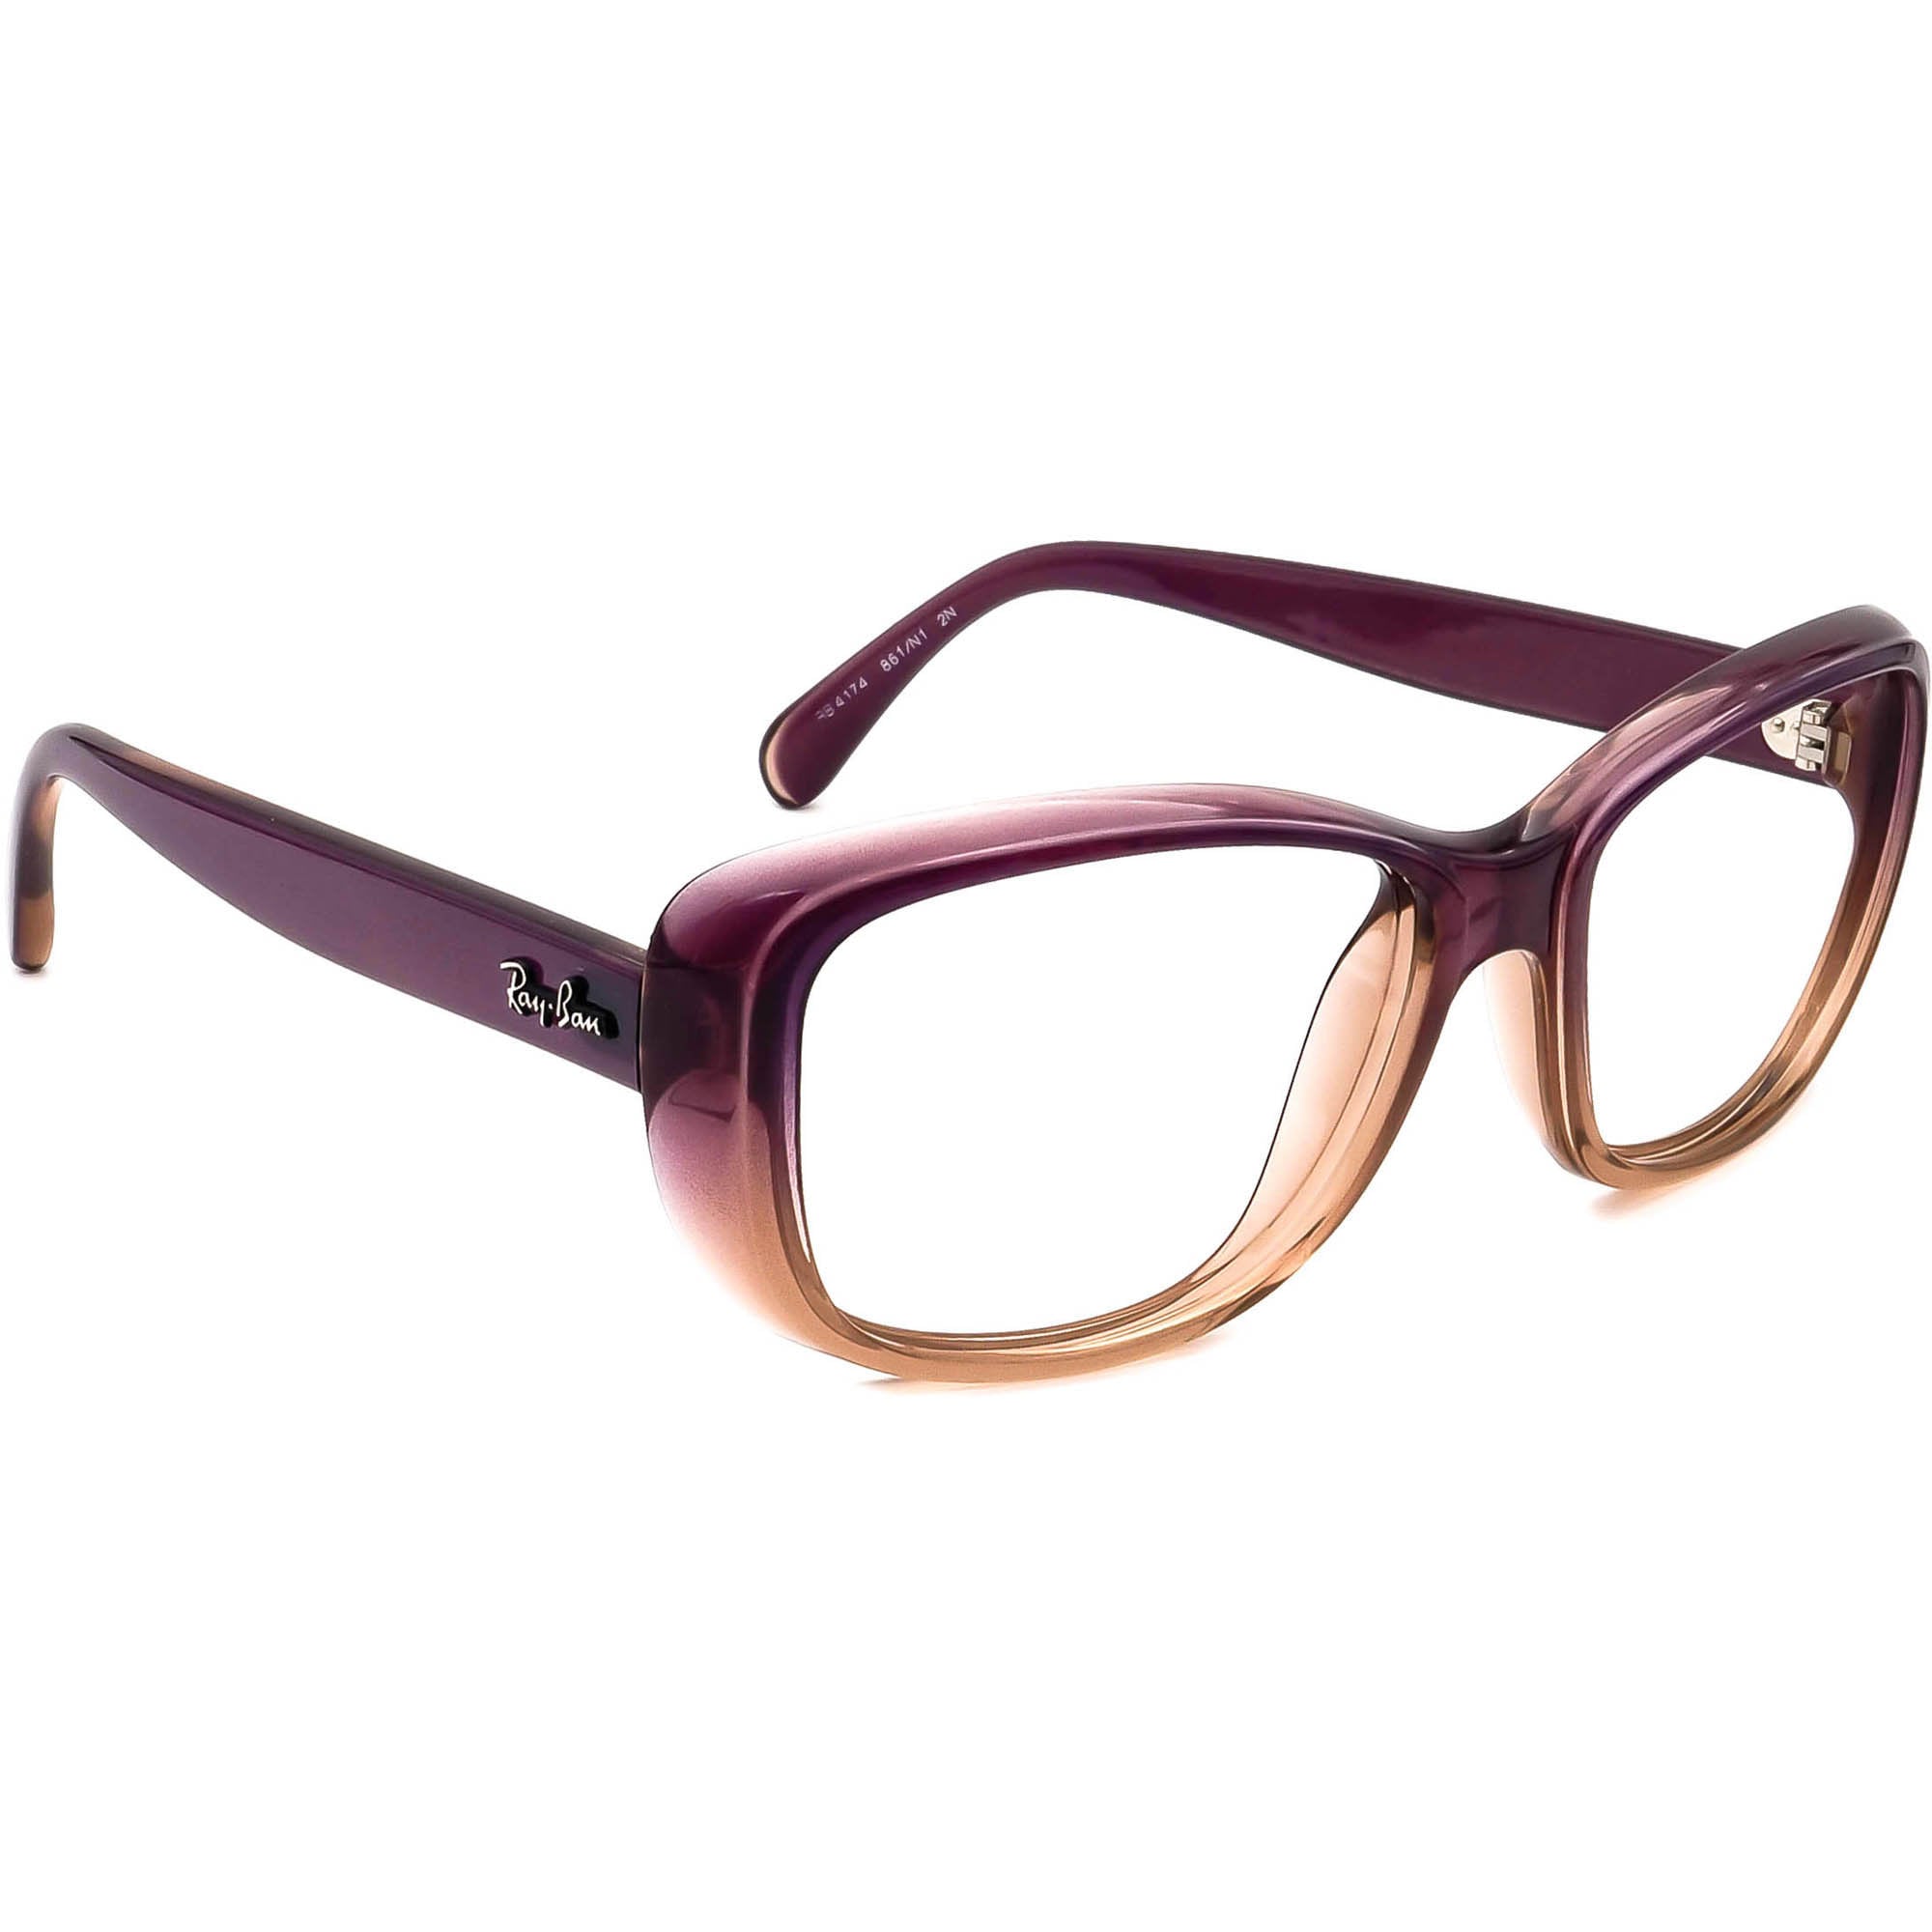 Ray-ban Sunglasses Frame Only RB 4174 861/N1 Purple Gradient - Etsy